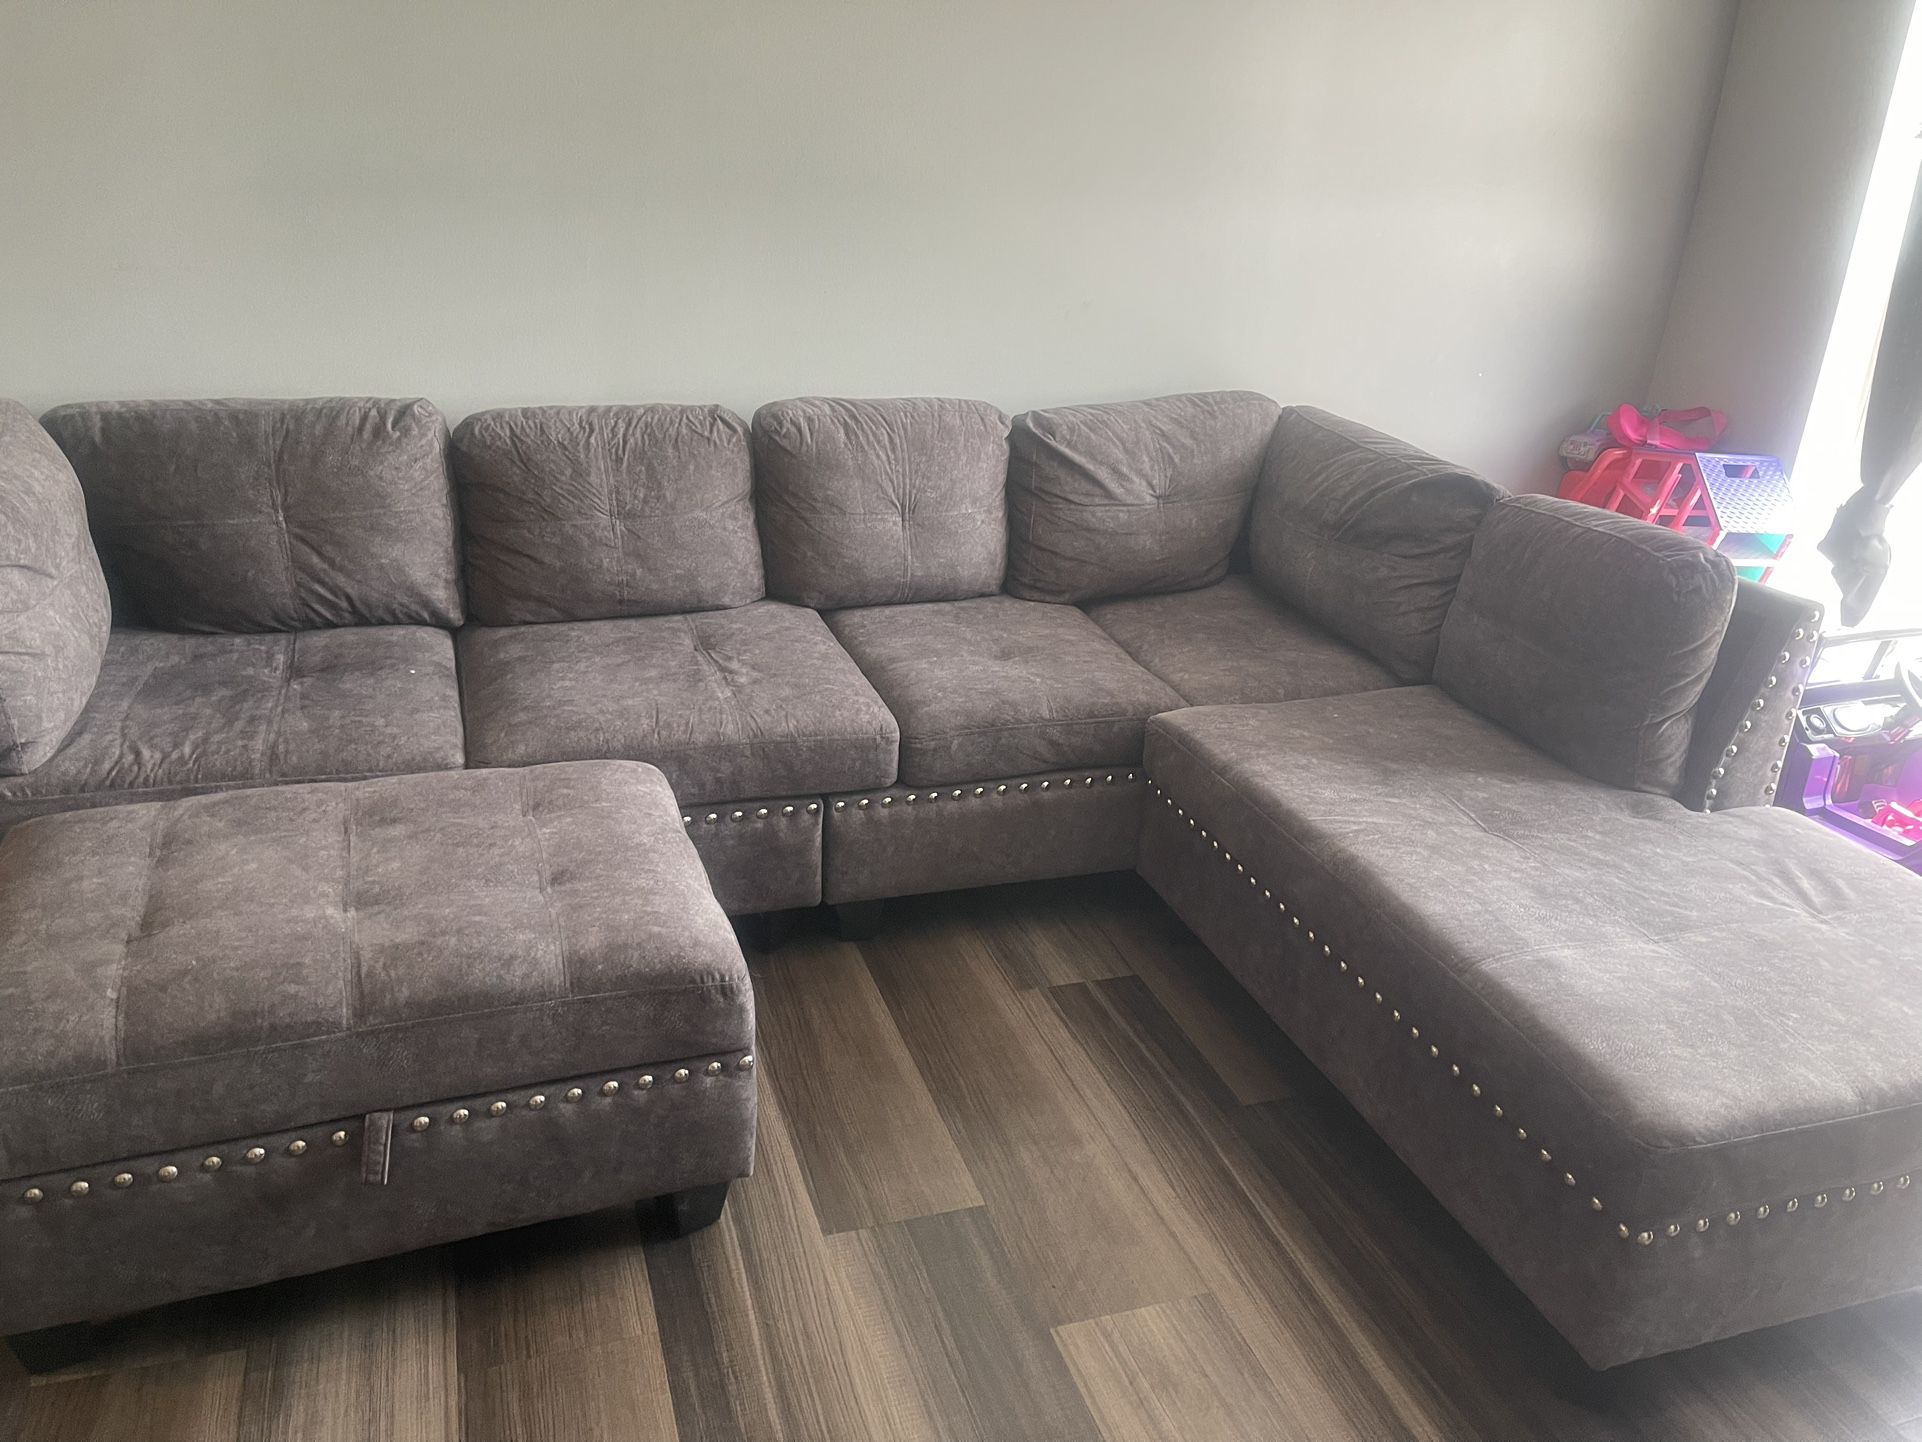 Couch With Pillows 940$